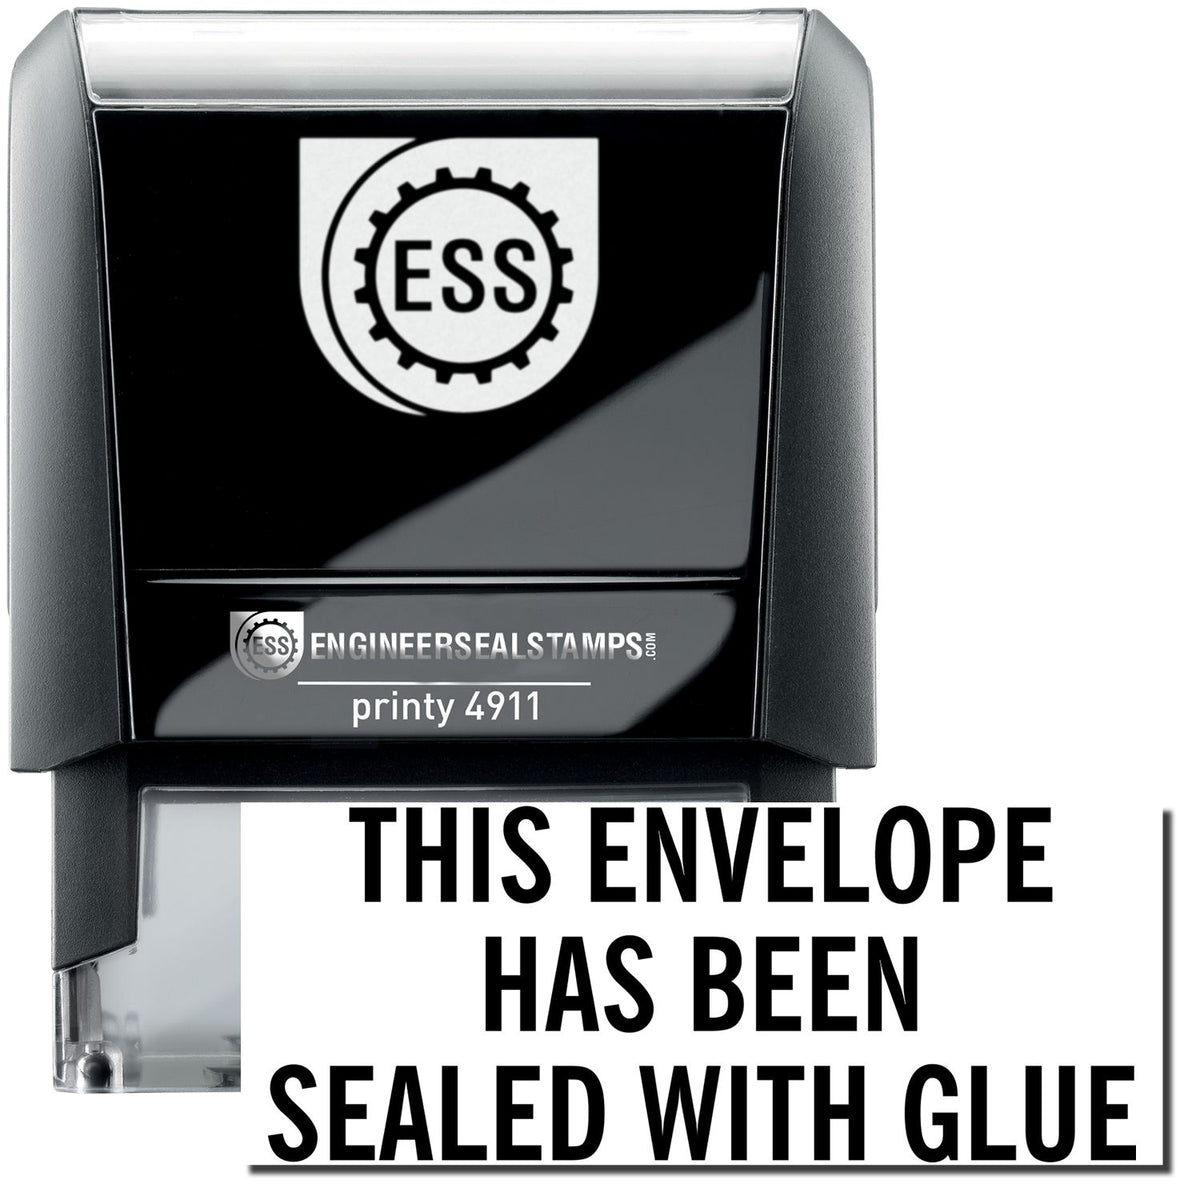 A self-inking stamp with a stamped image showing how the text &quot;THIS ENVELOPE HAS BEEN SEALED WITH GLUE&quot; is displayed after stamping.